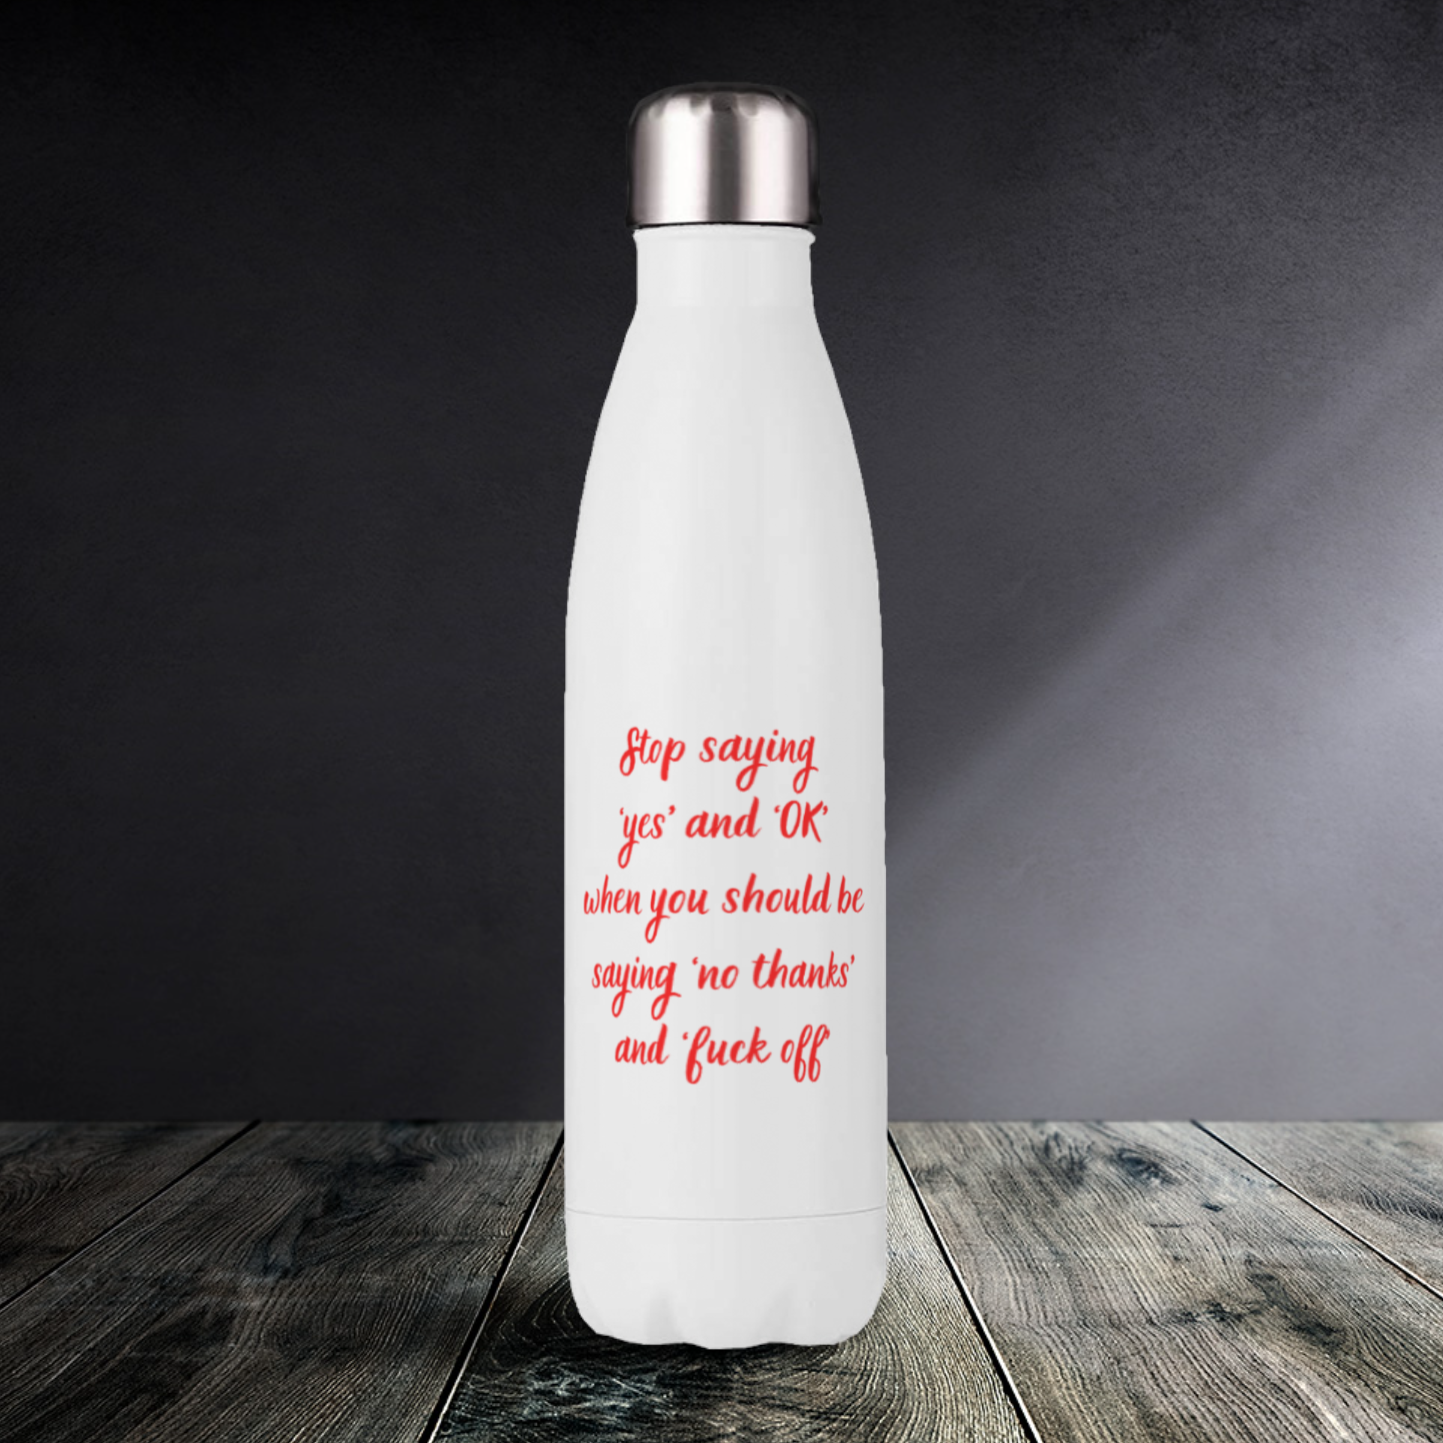 Stop saying yes and OK - Drink Bottles